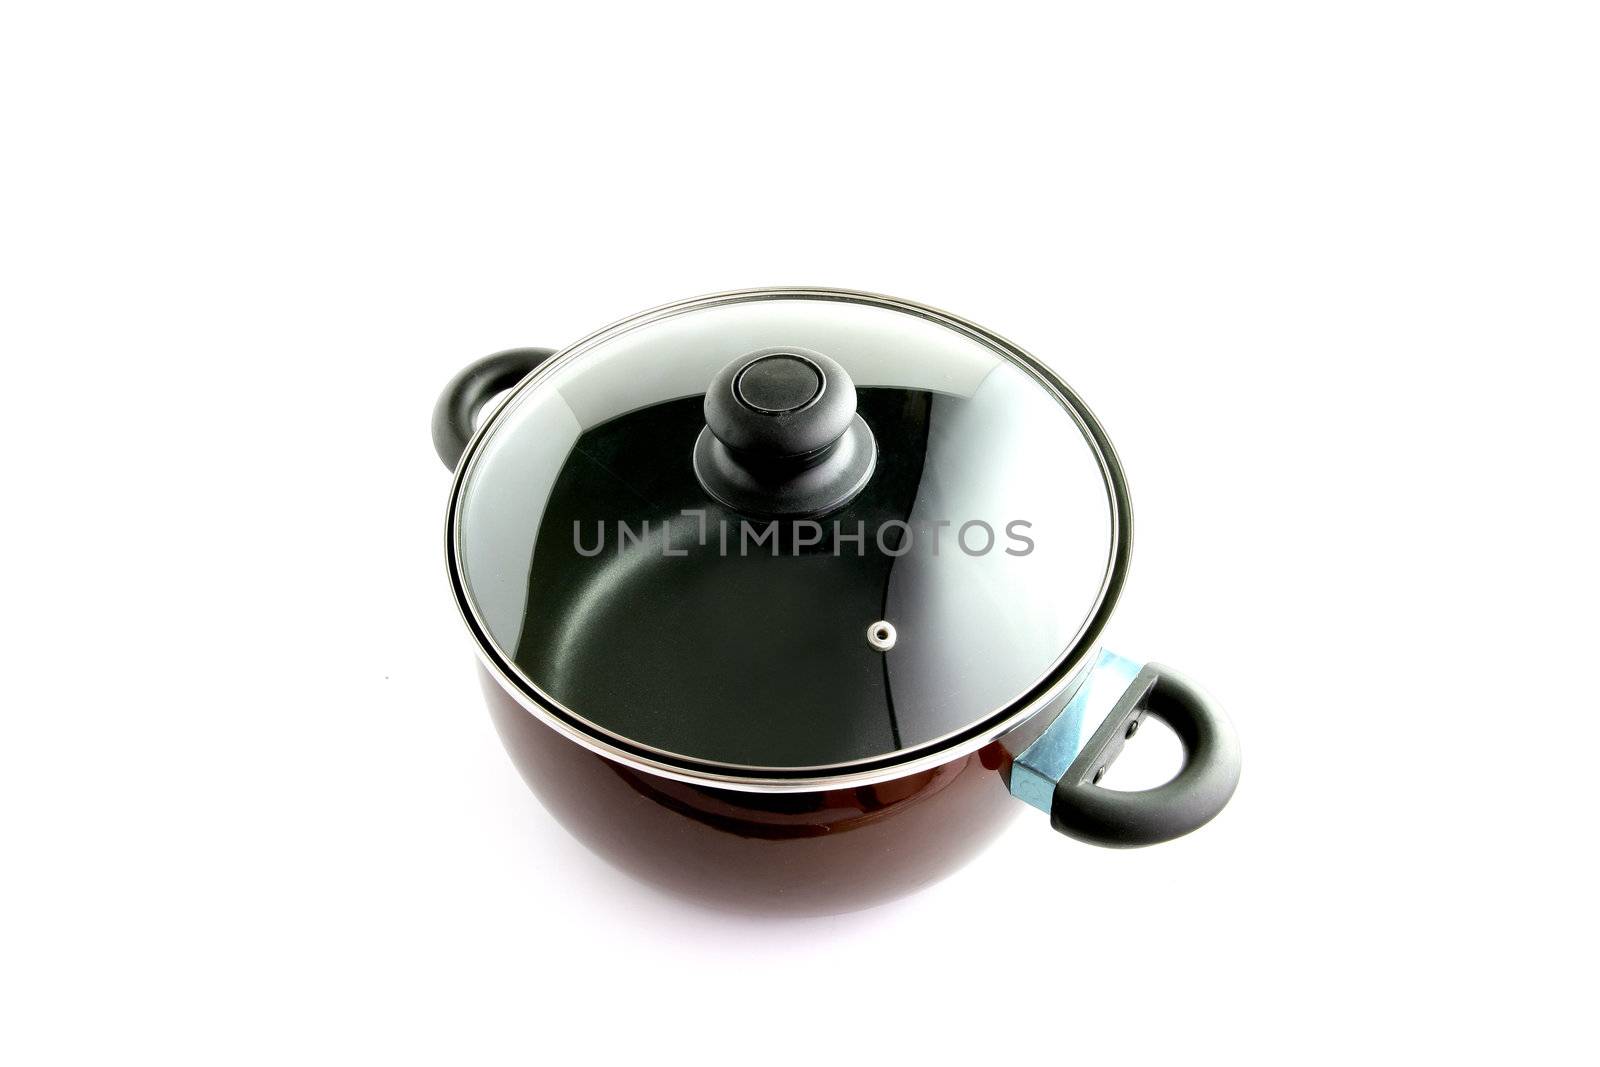 Large pan with glass lid